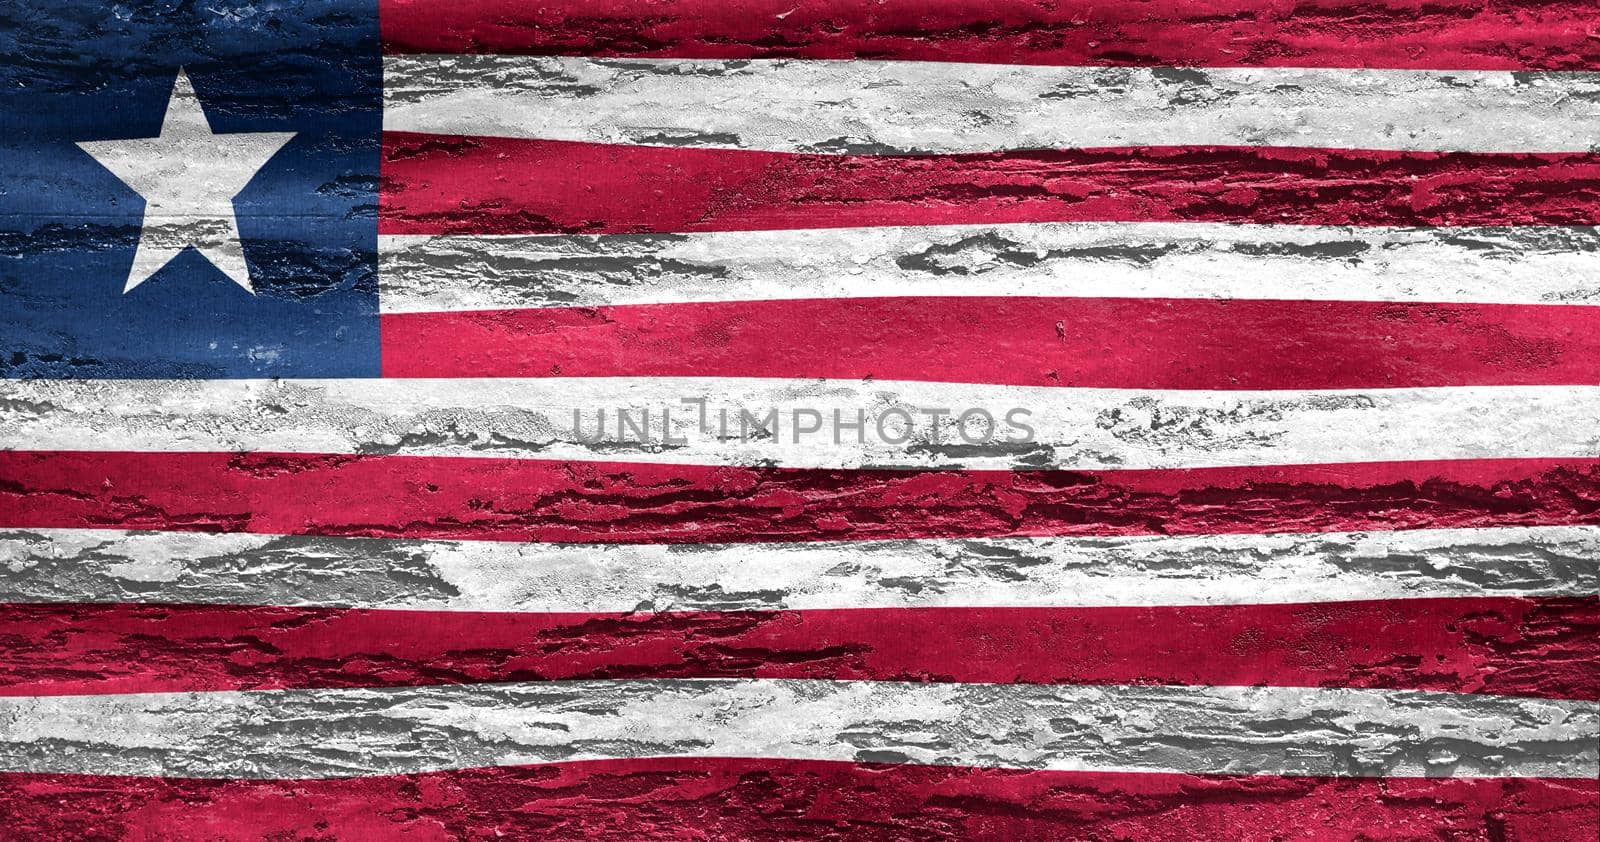 3D-Illustration of a Liberia flag - realistic waving fabric flag by MP_foto71